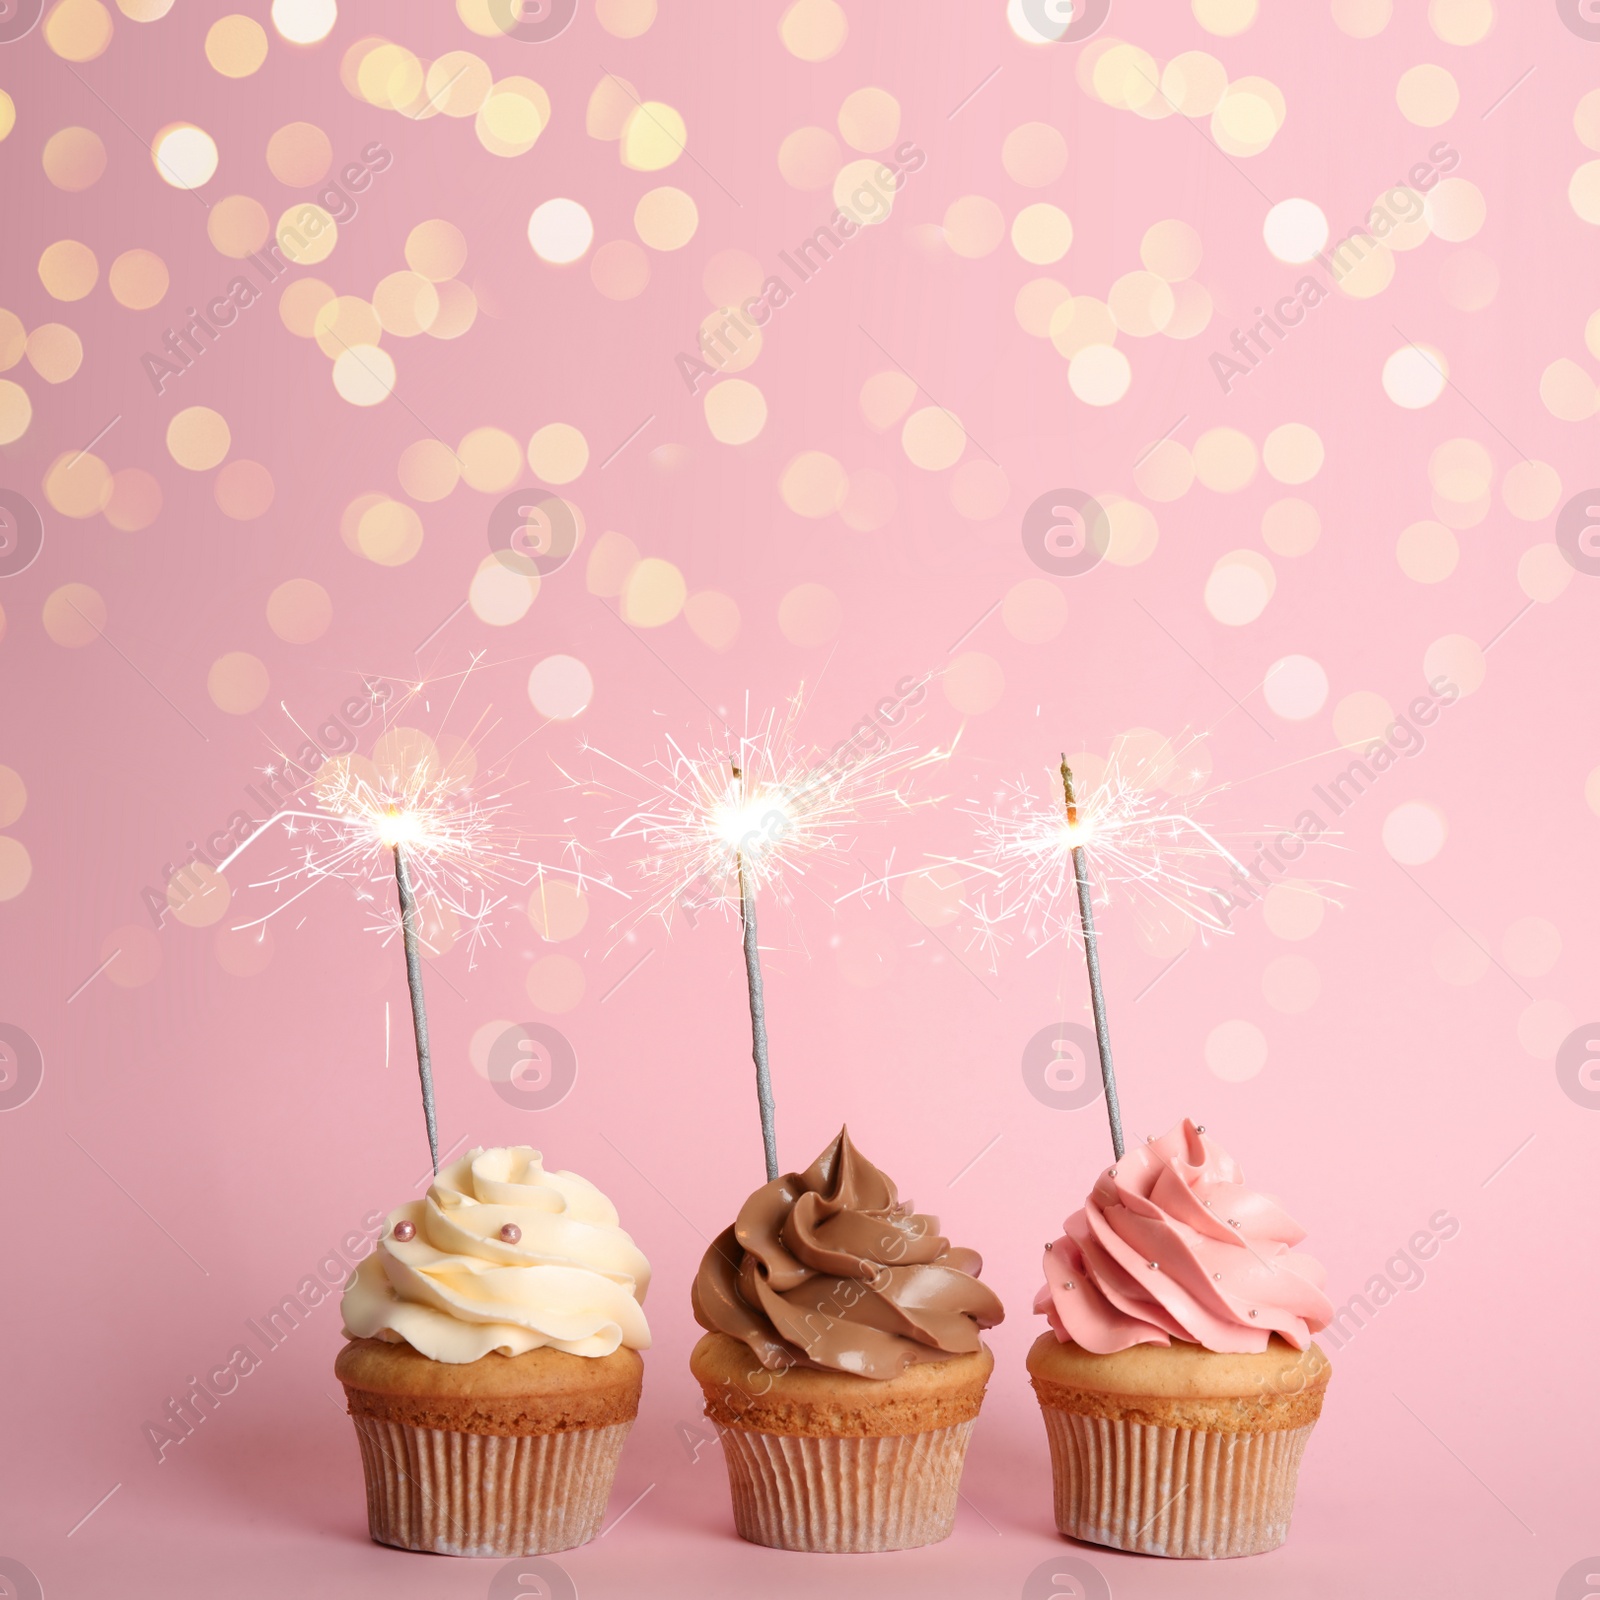 Image of Birthday cupcakes with sparklers on pink background